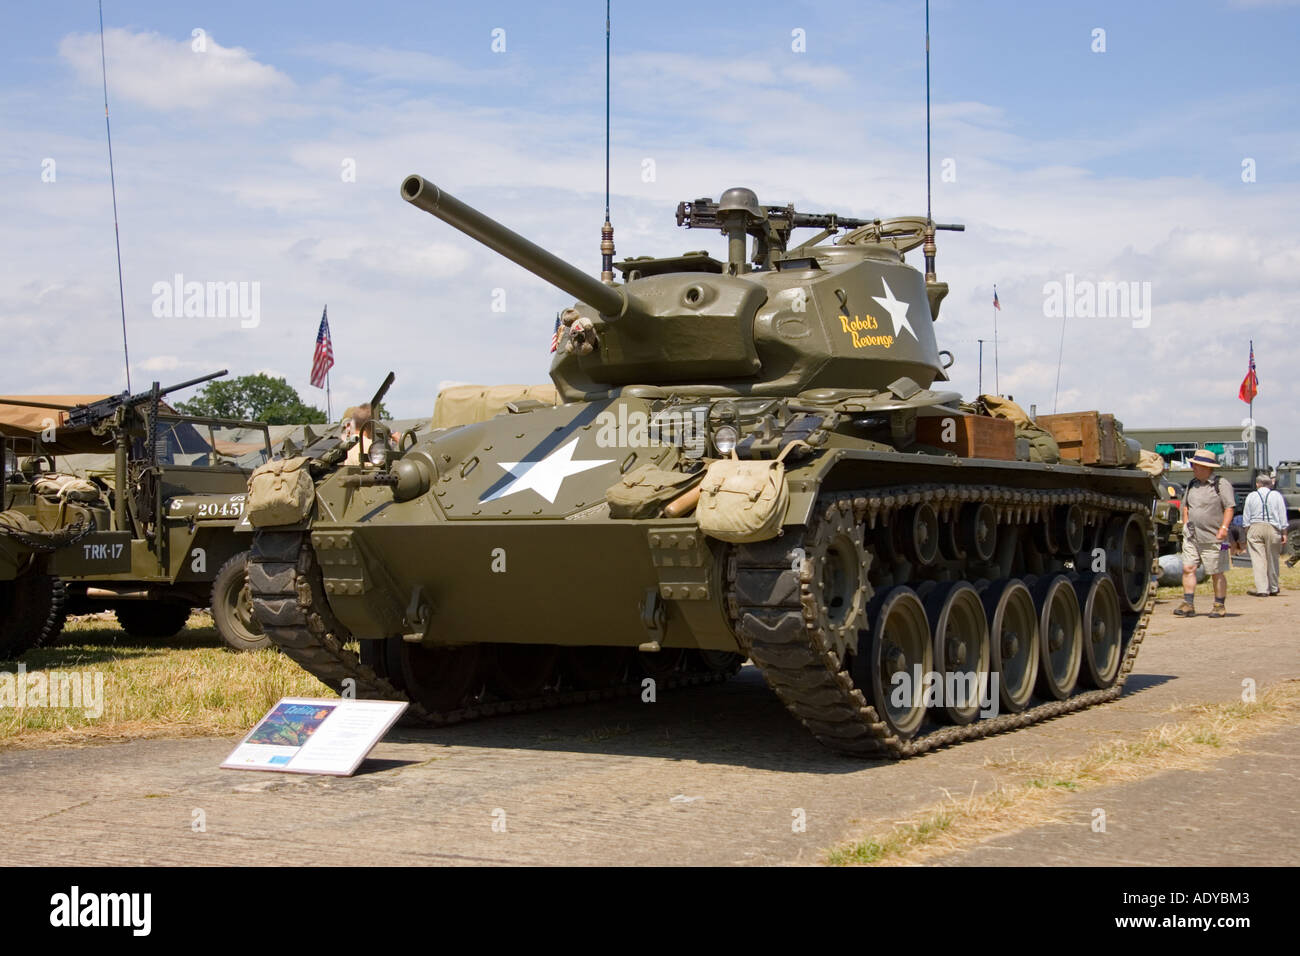 A Cadillac M24 Chaffee light tank on display at Rougham fair in Suffolk 2006 Stock Photo